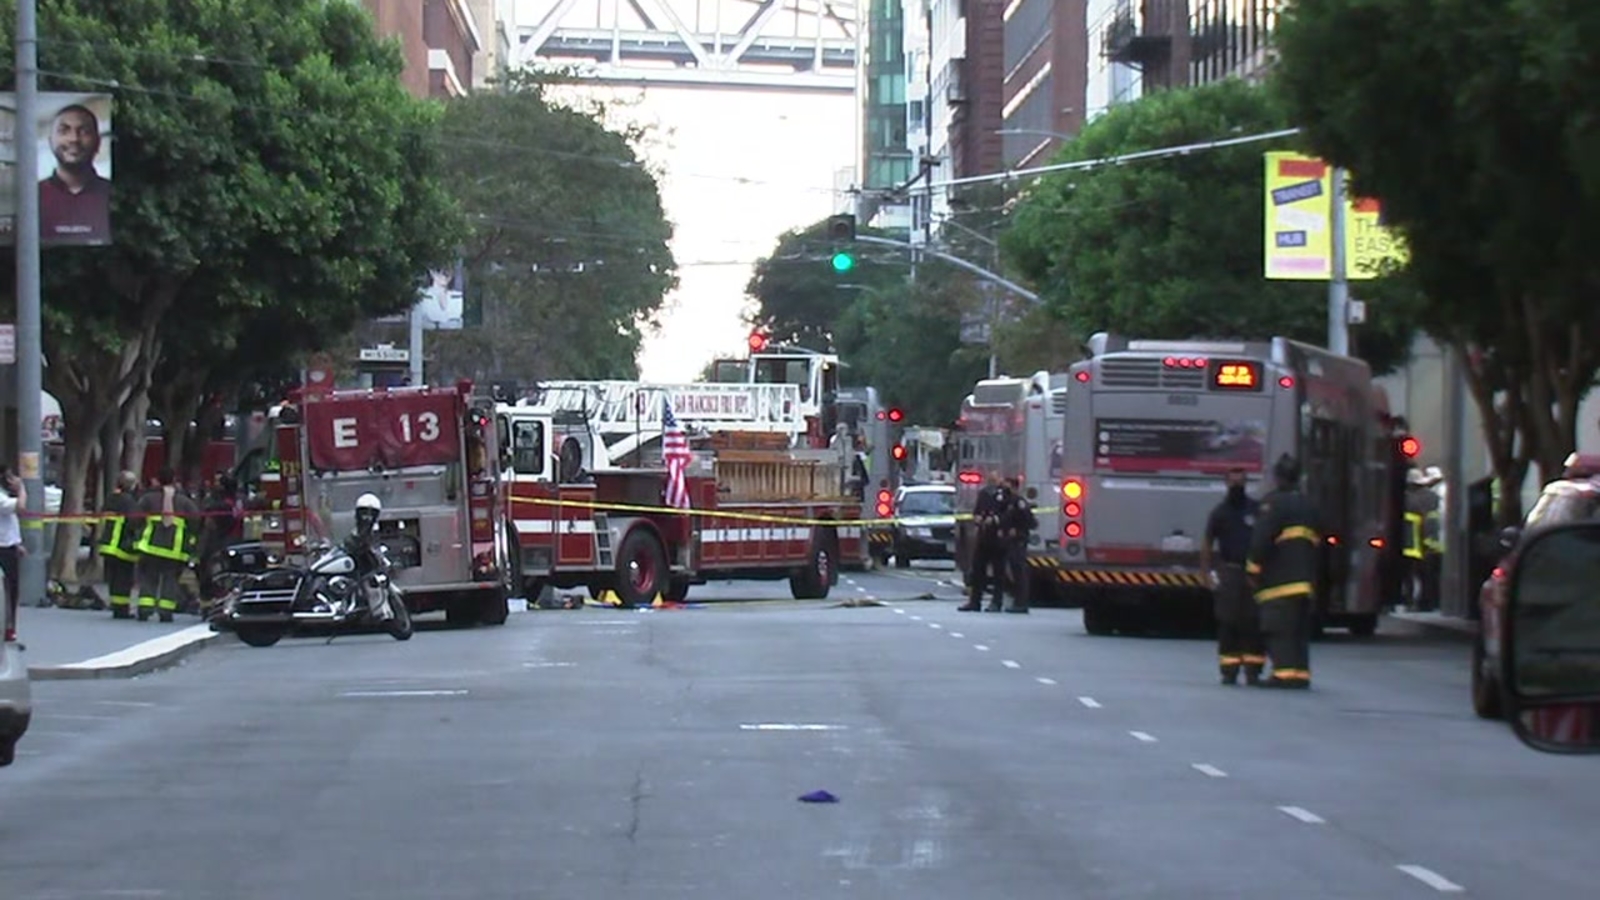 San Francisco Firefighter Critically Injured in Freak Accident